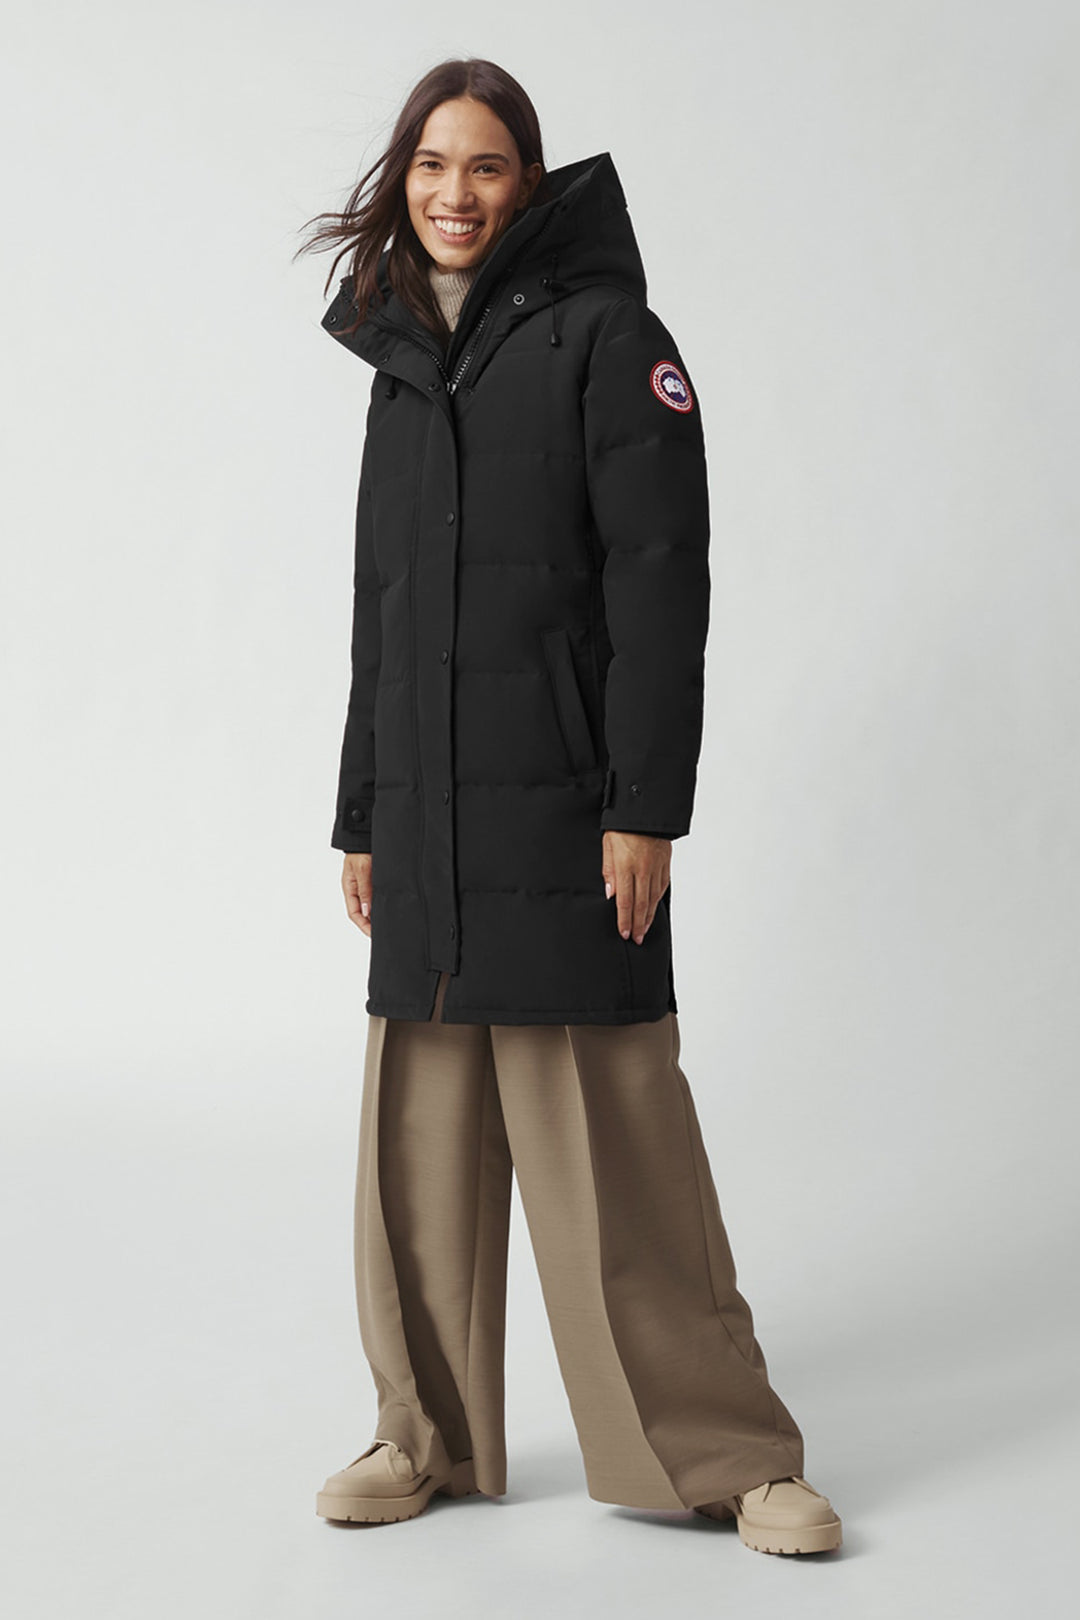 Safety Partner - DSG Women's Outerwear - Ontario Federation of